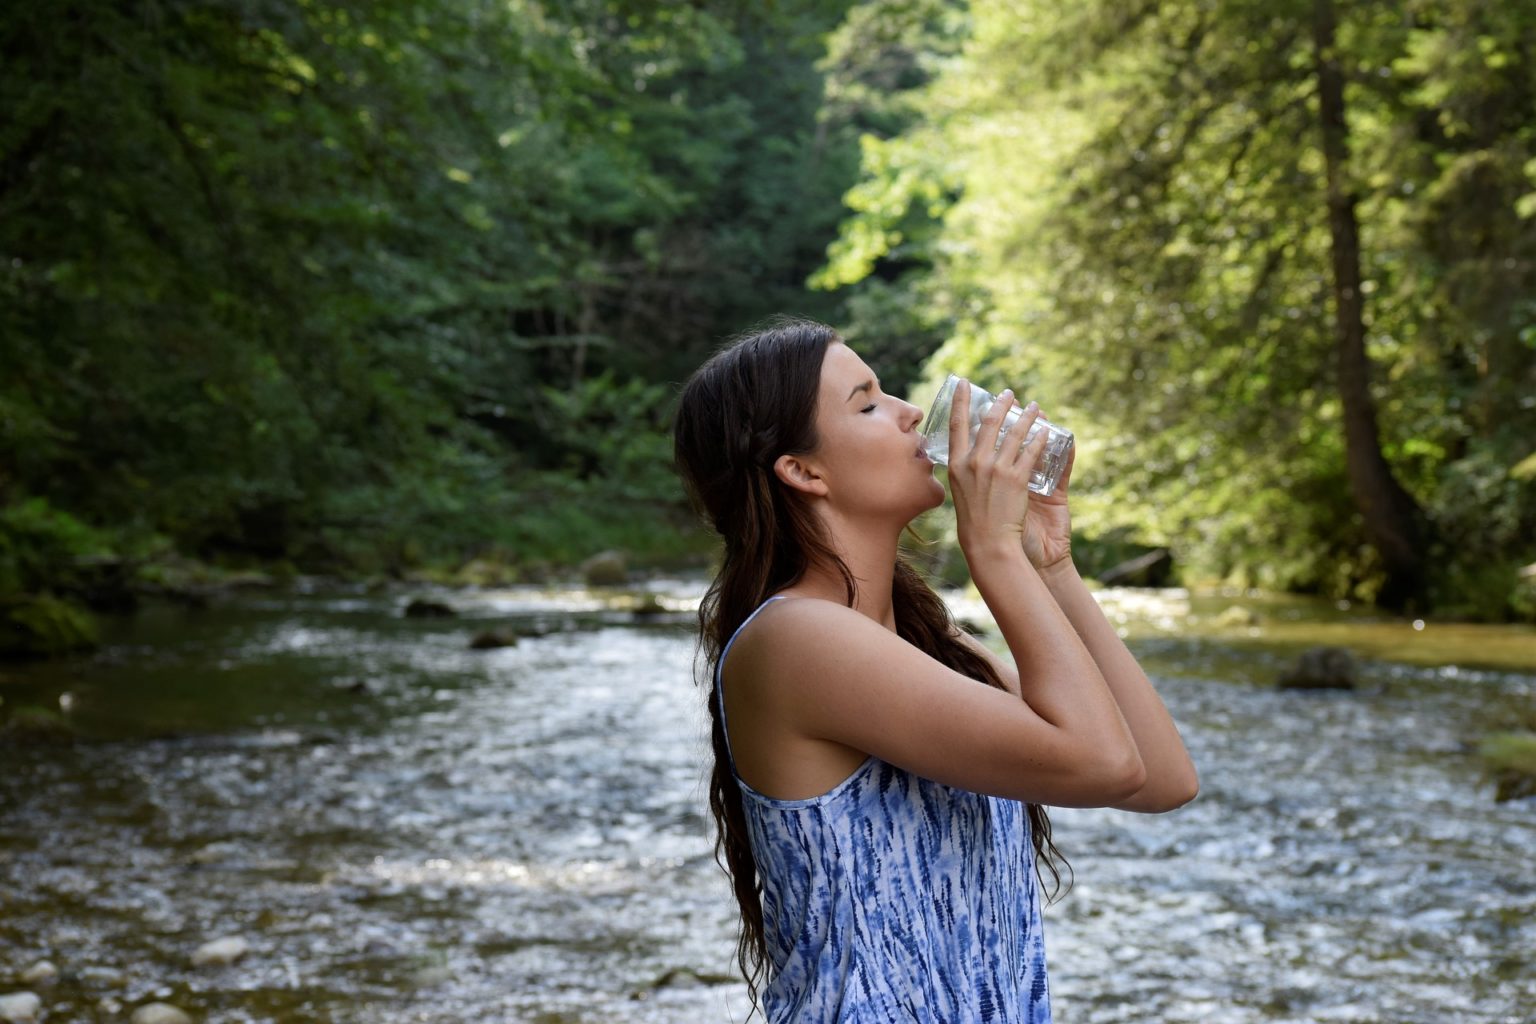 Things to consider when choosing drinking water #2